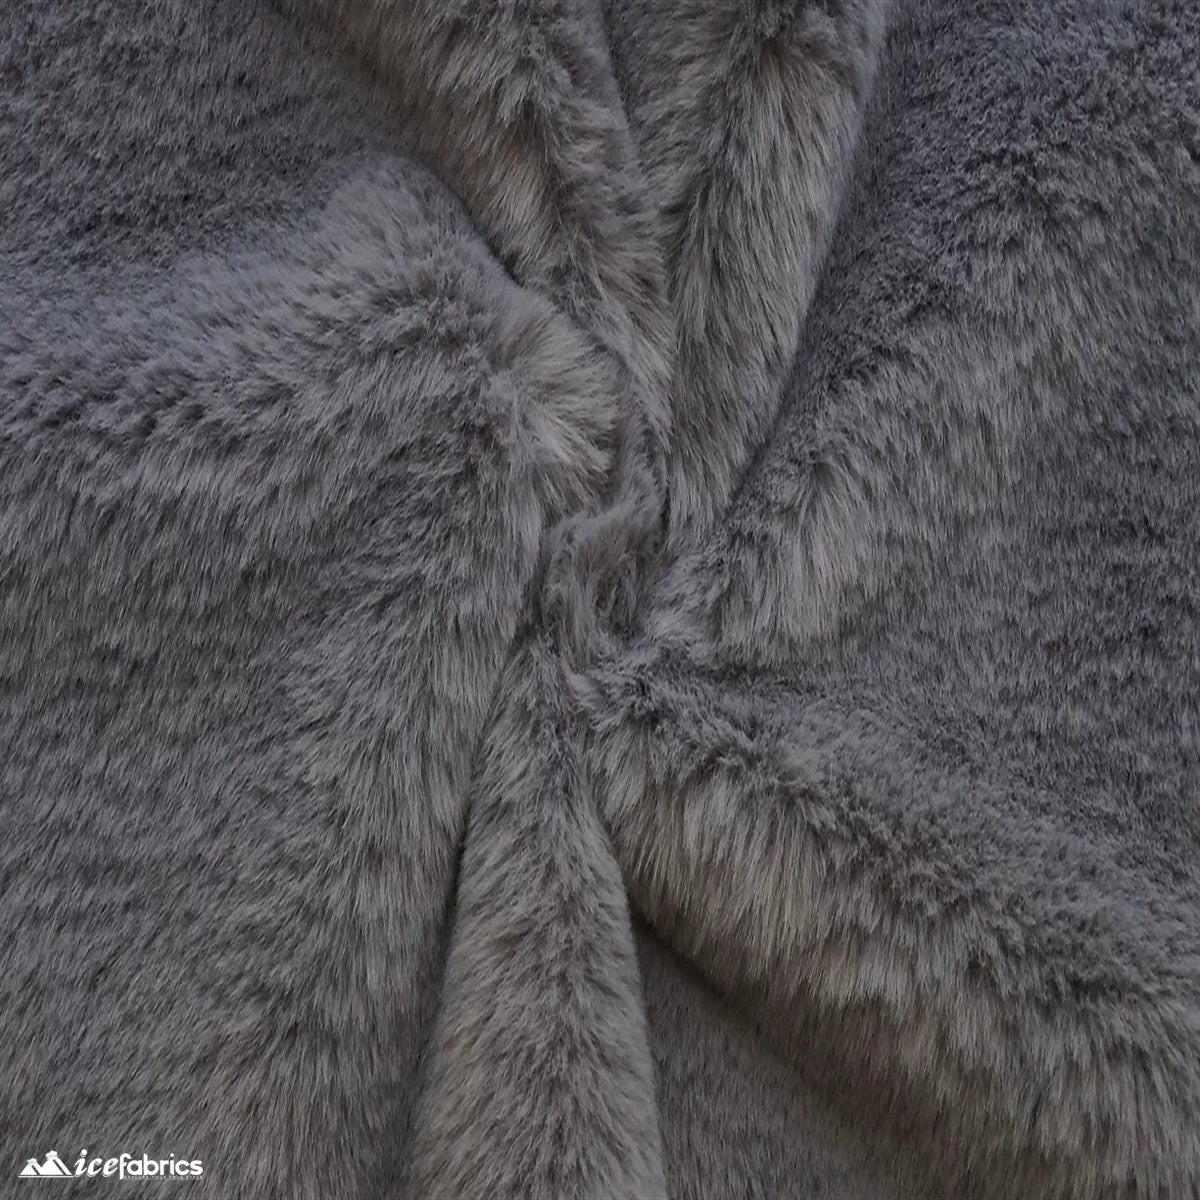 Bunny Thick Faux Fur Minky Fabric / Short Pile / Super SoftICE FABRICSICE FABRICSCharcoalBy The Yard (60 inches Wide)Bunny Thick Faux Fur Minky Fabric / Short Pile / Super Soft ICE FABRICS Charcoal